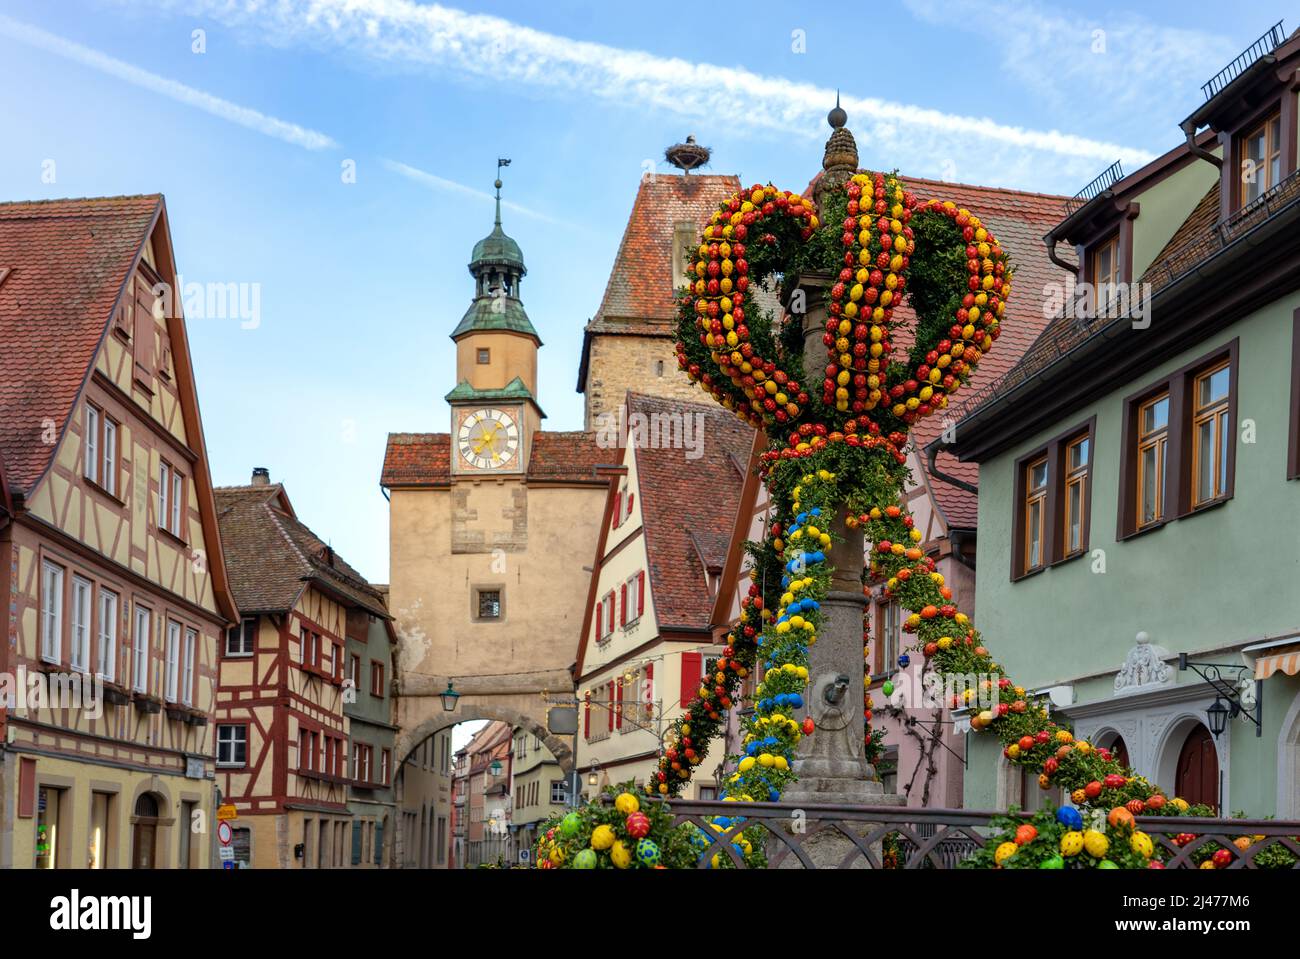 Easter holiday decoration in the beautiful german middle age village Rothenburg ob der Tauber Germany . Stock Photo